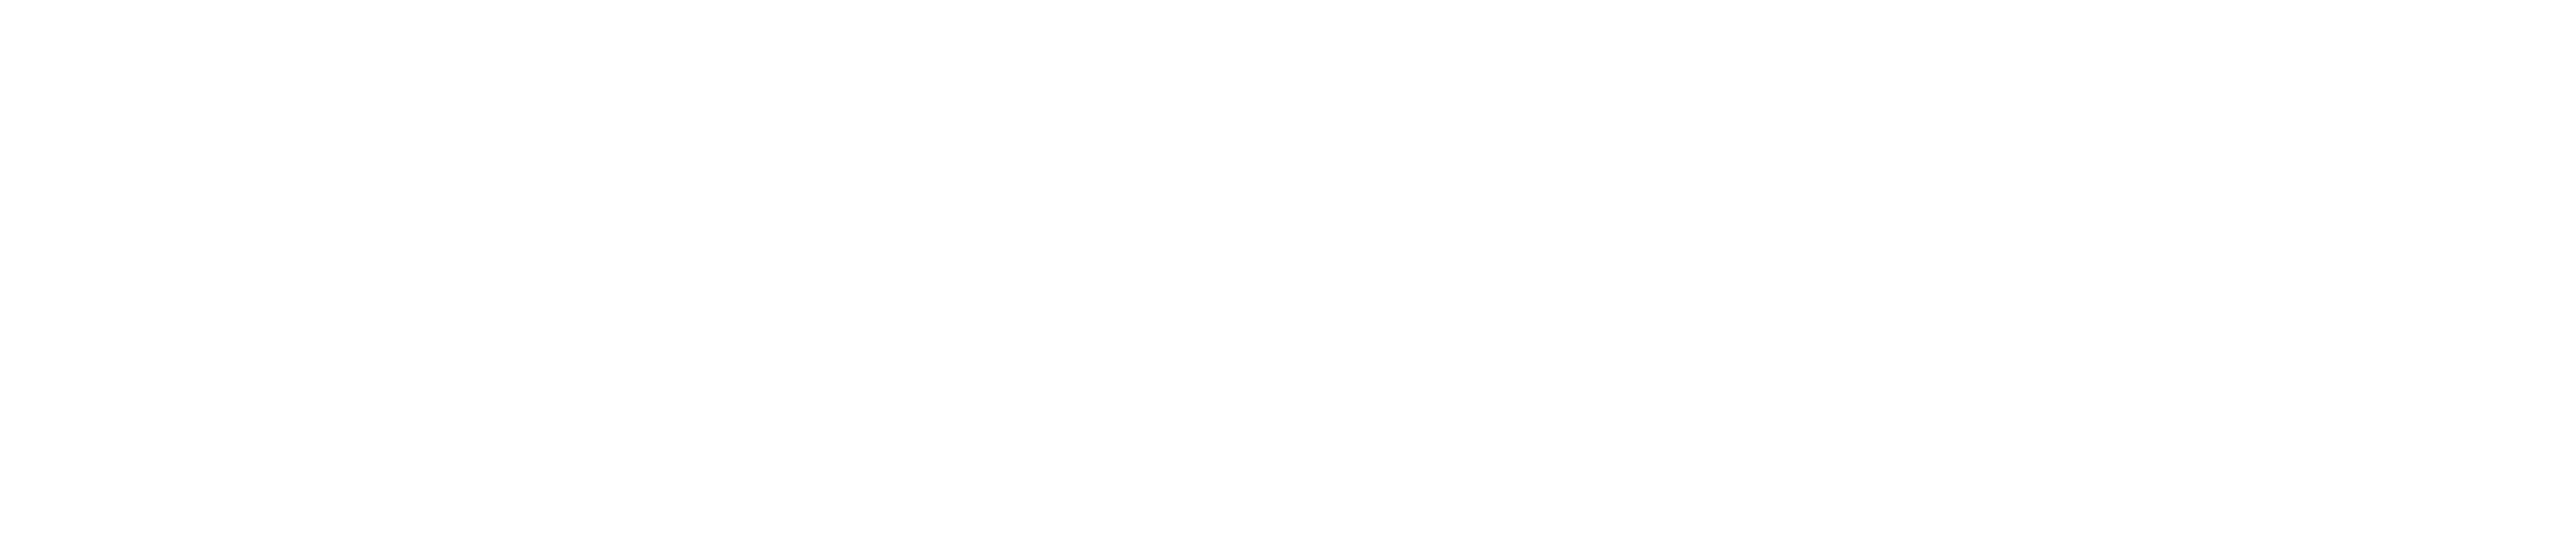 Western State College of Law